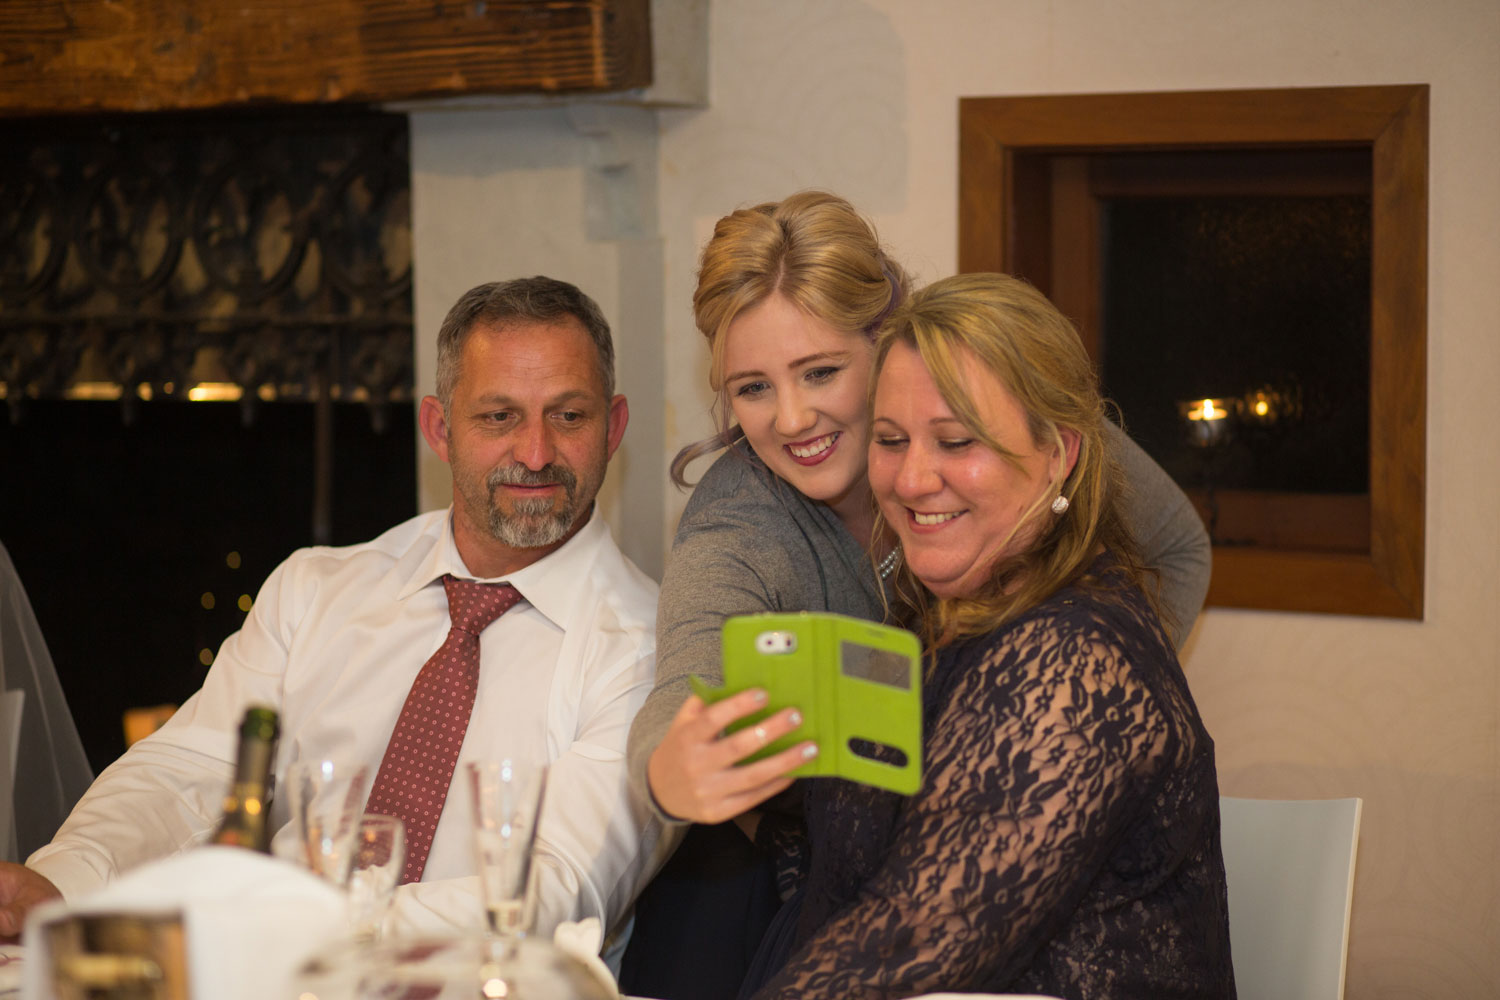 guests taking a selfie wedding reception